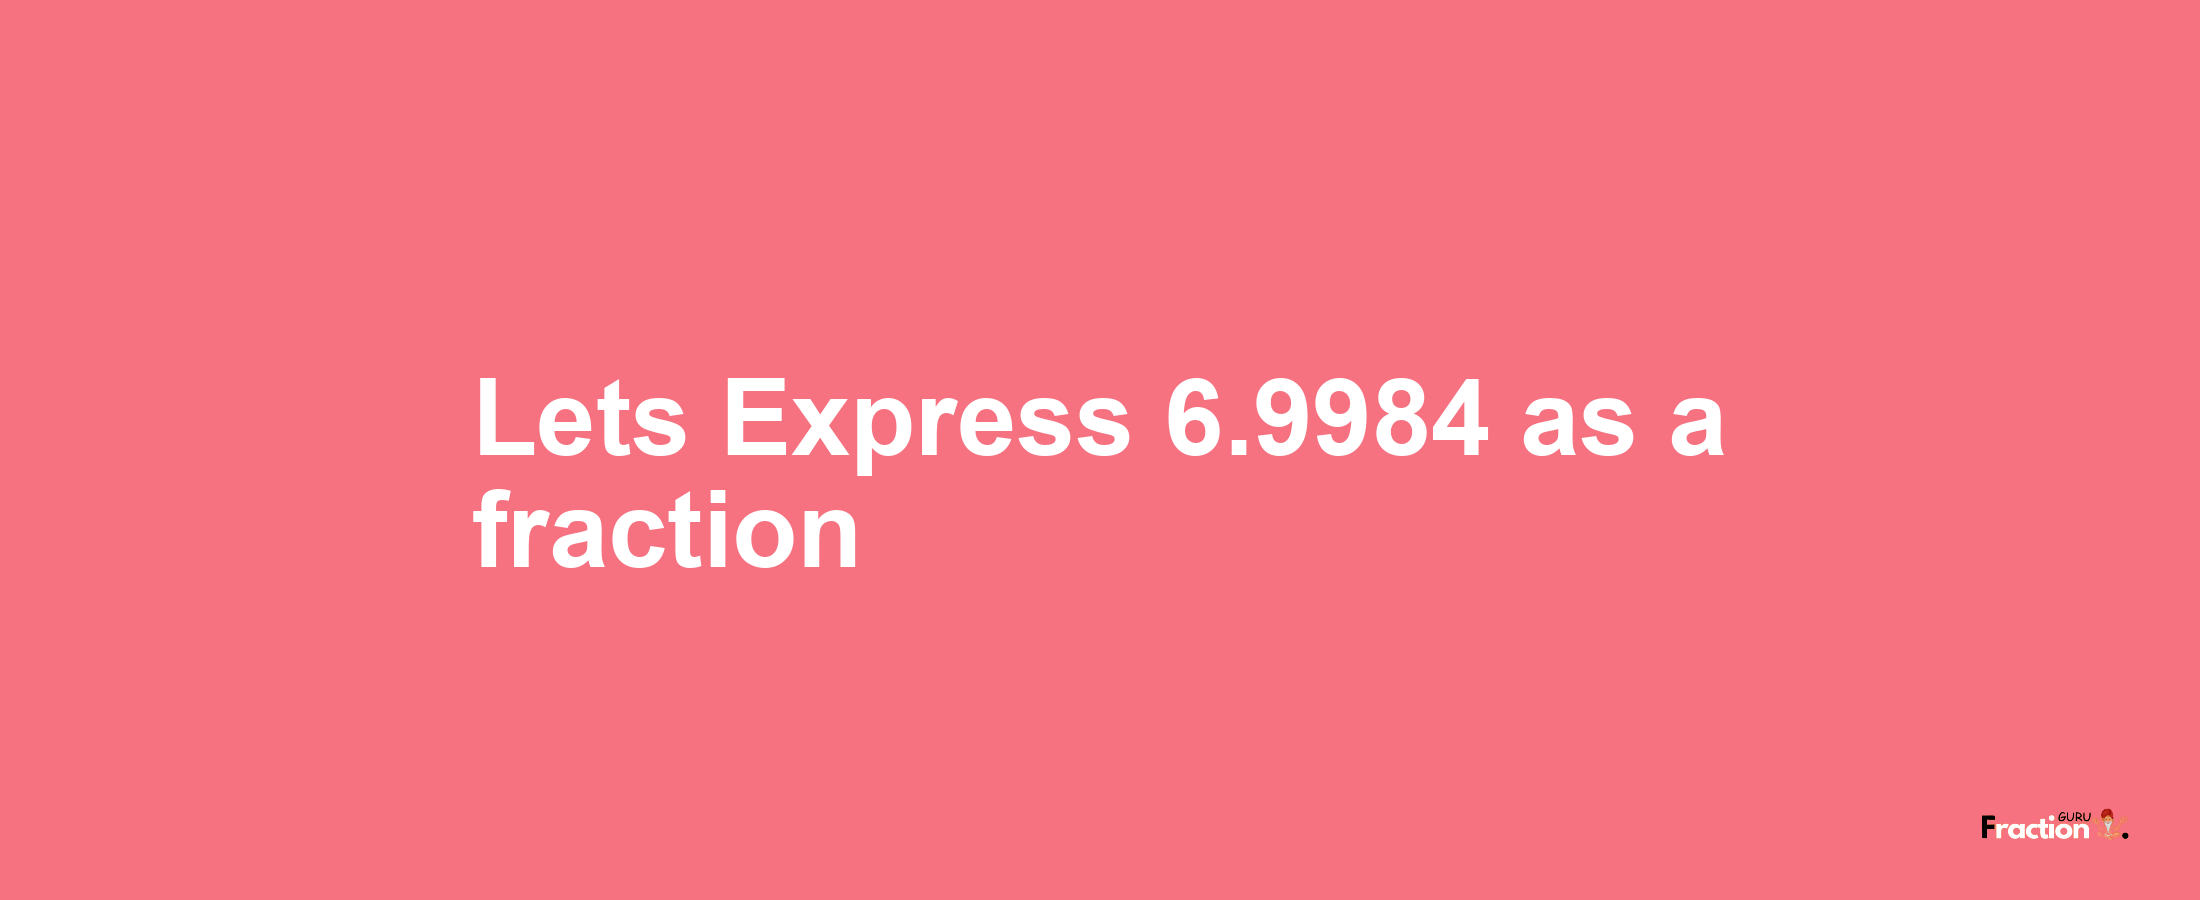 Lets Express 6.9984 as afraction